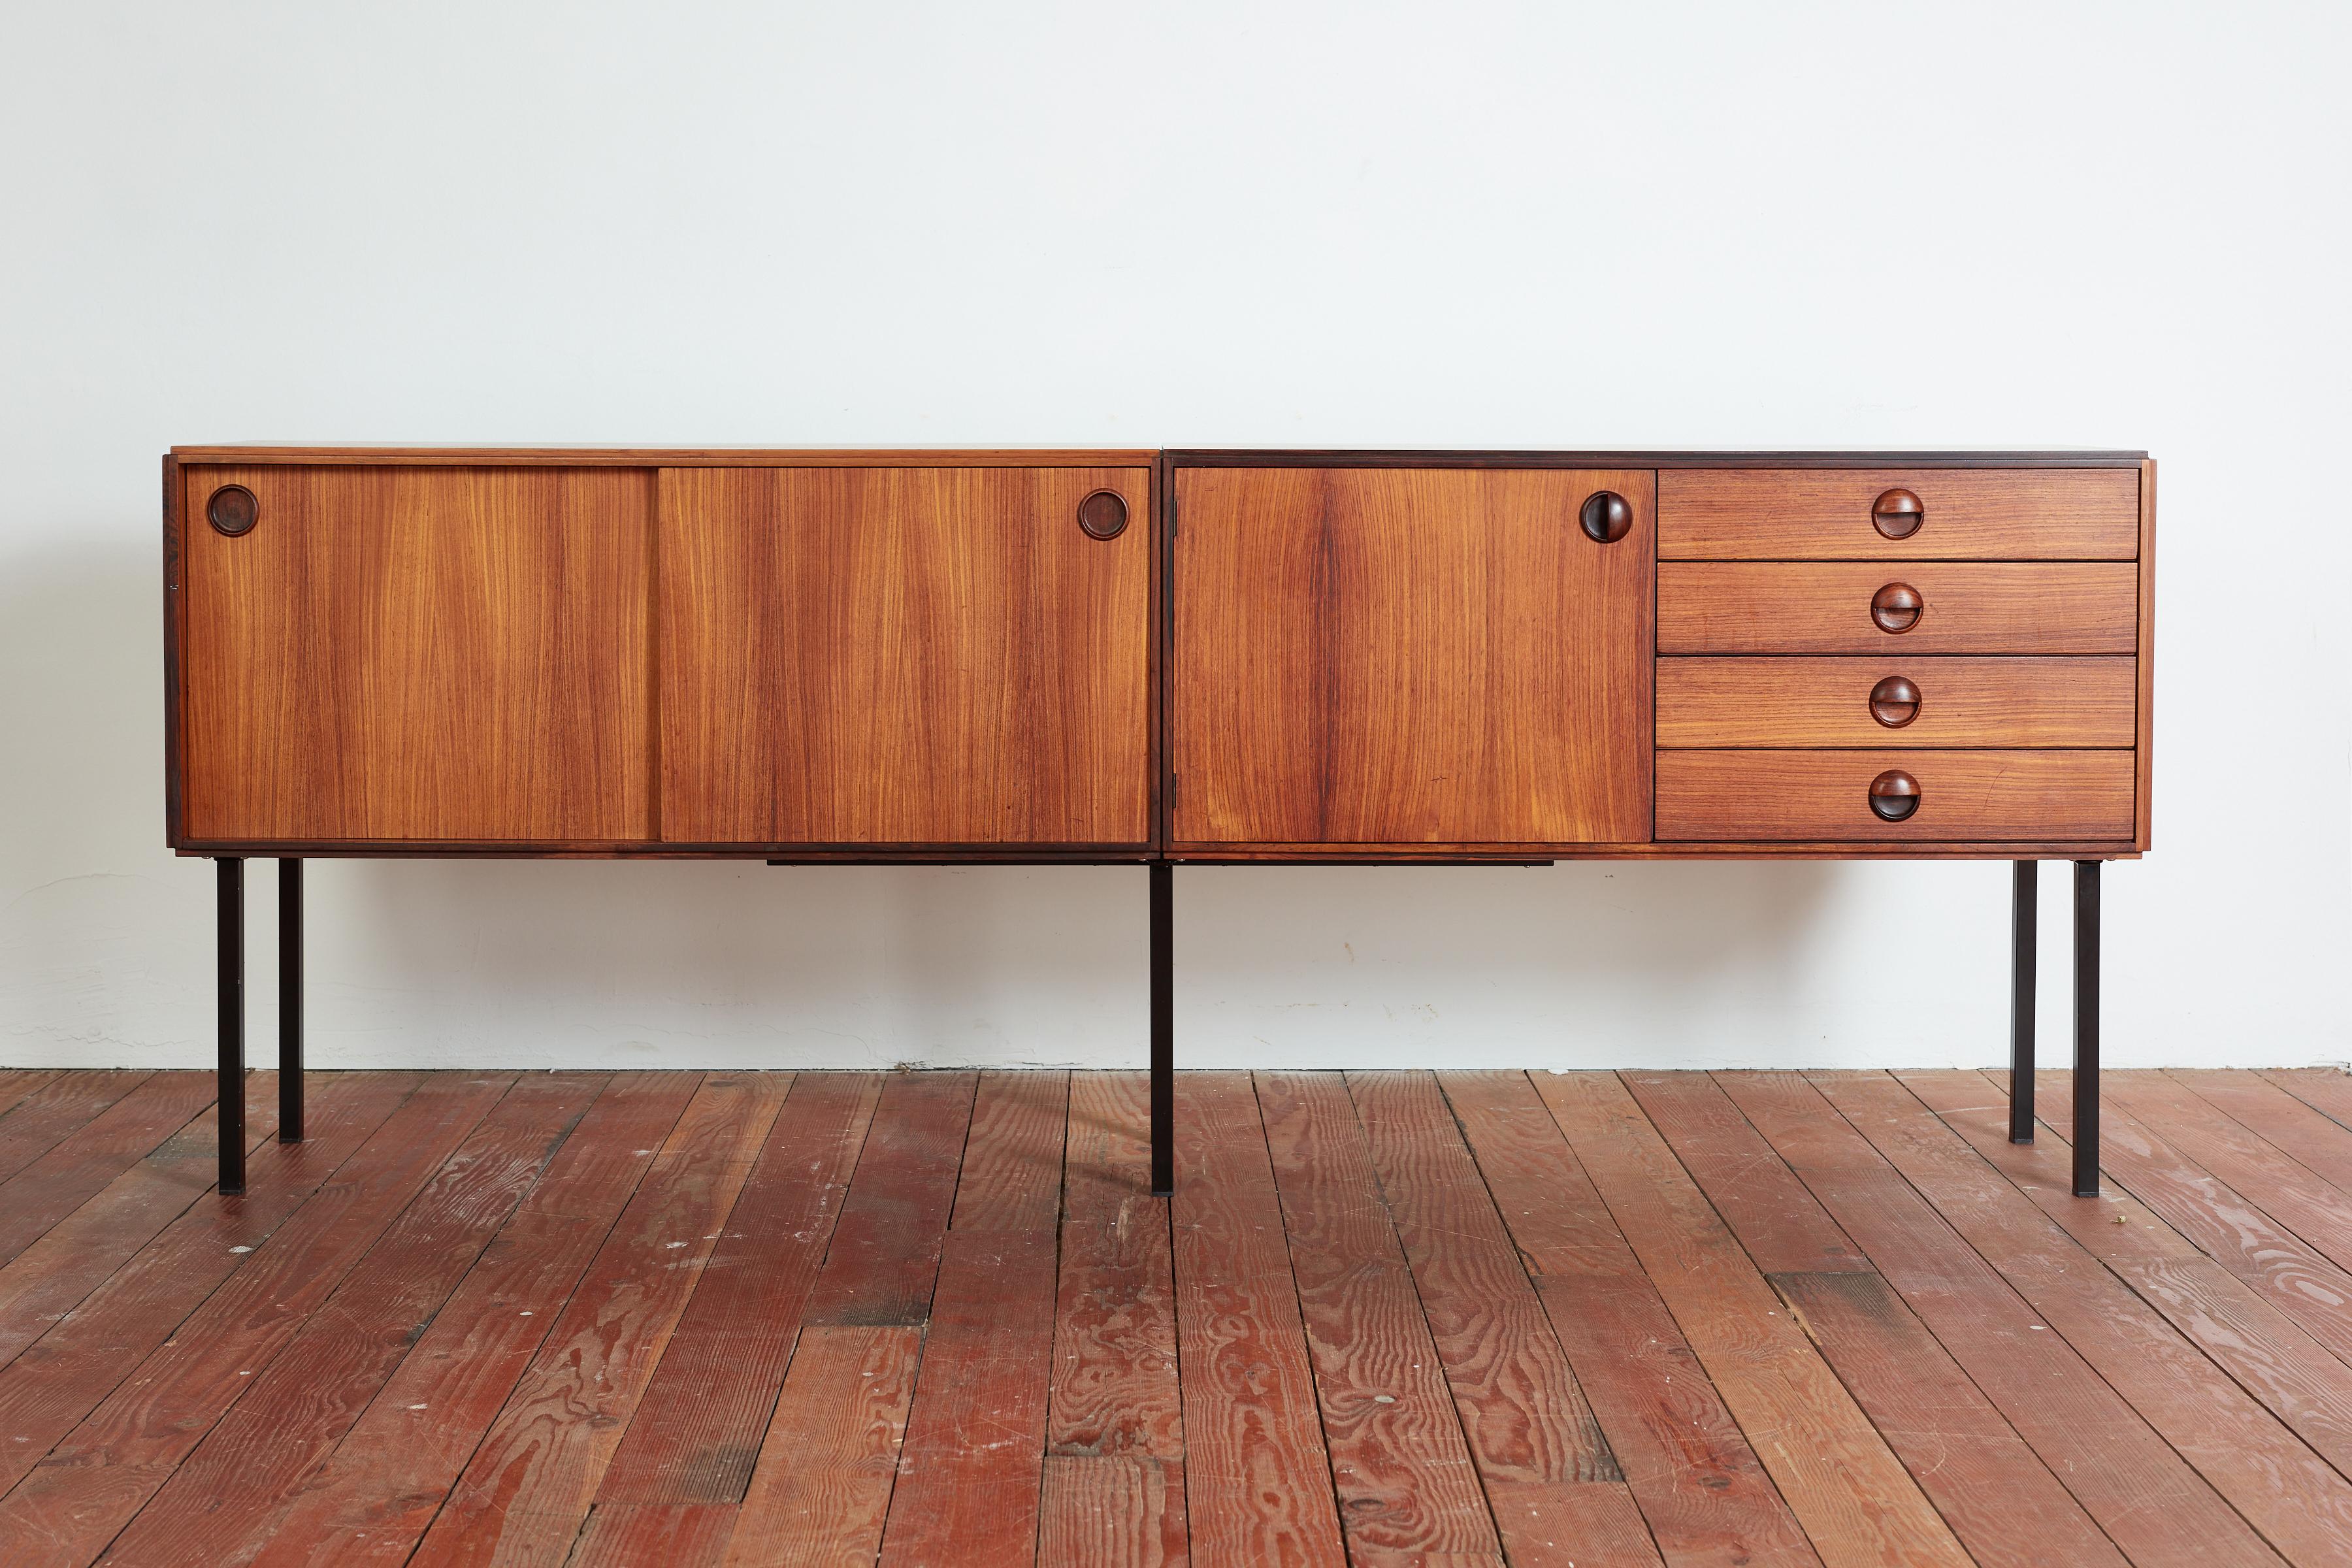 Handsome Danish sideboard constructed of teak with rosewood pulls and black iron base.
Beautiful craftsmanship and patina 
Sliding cabinets doors that open up to shelving with set of 4 drawers resting on sleek iron base. 

Denmark 1950s